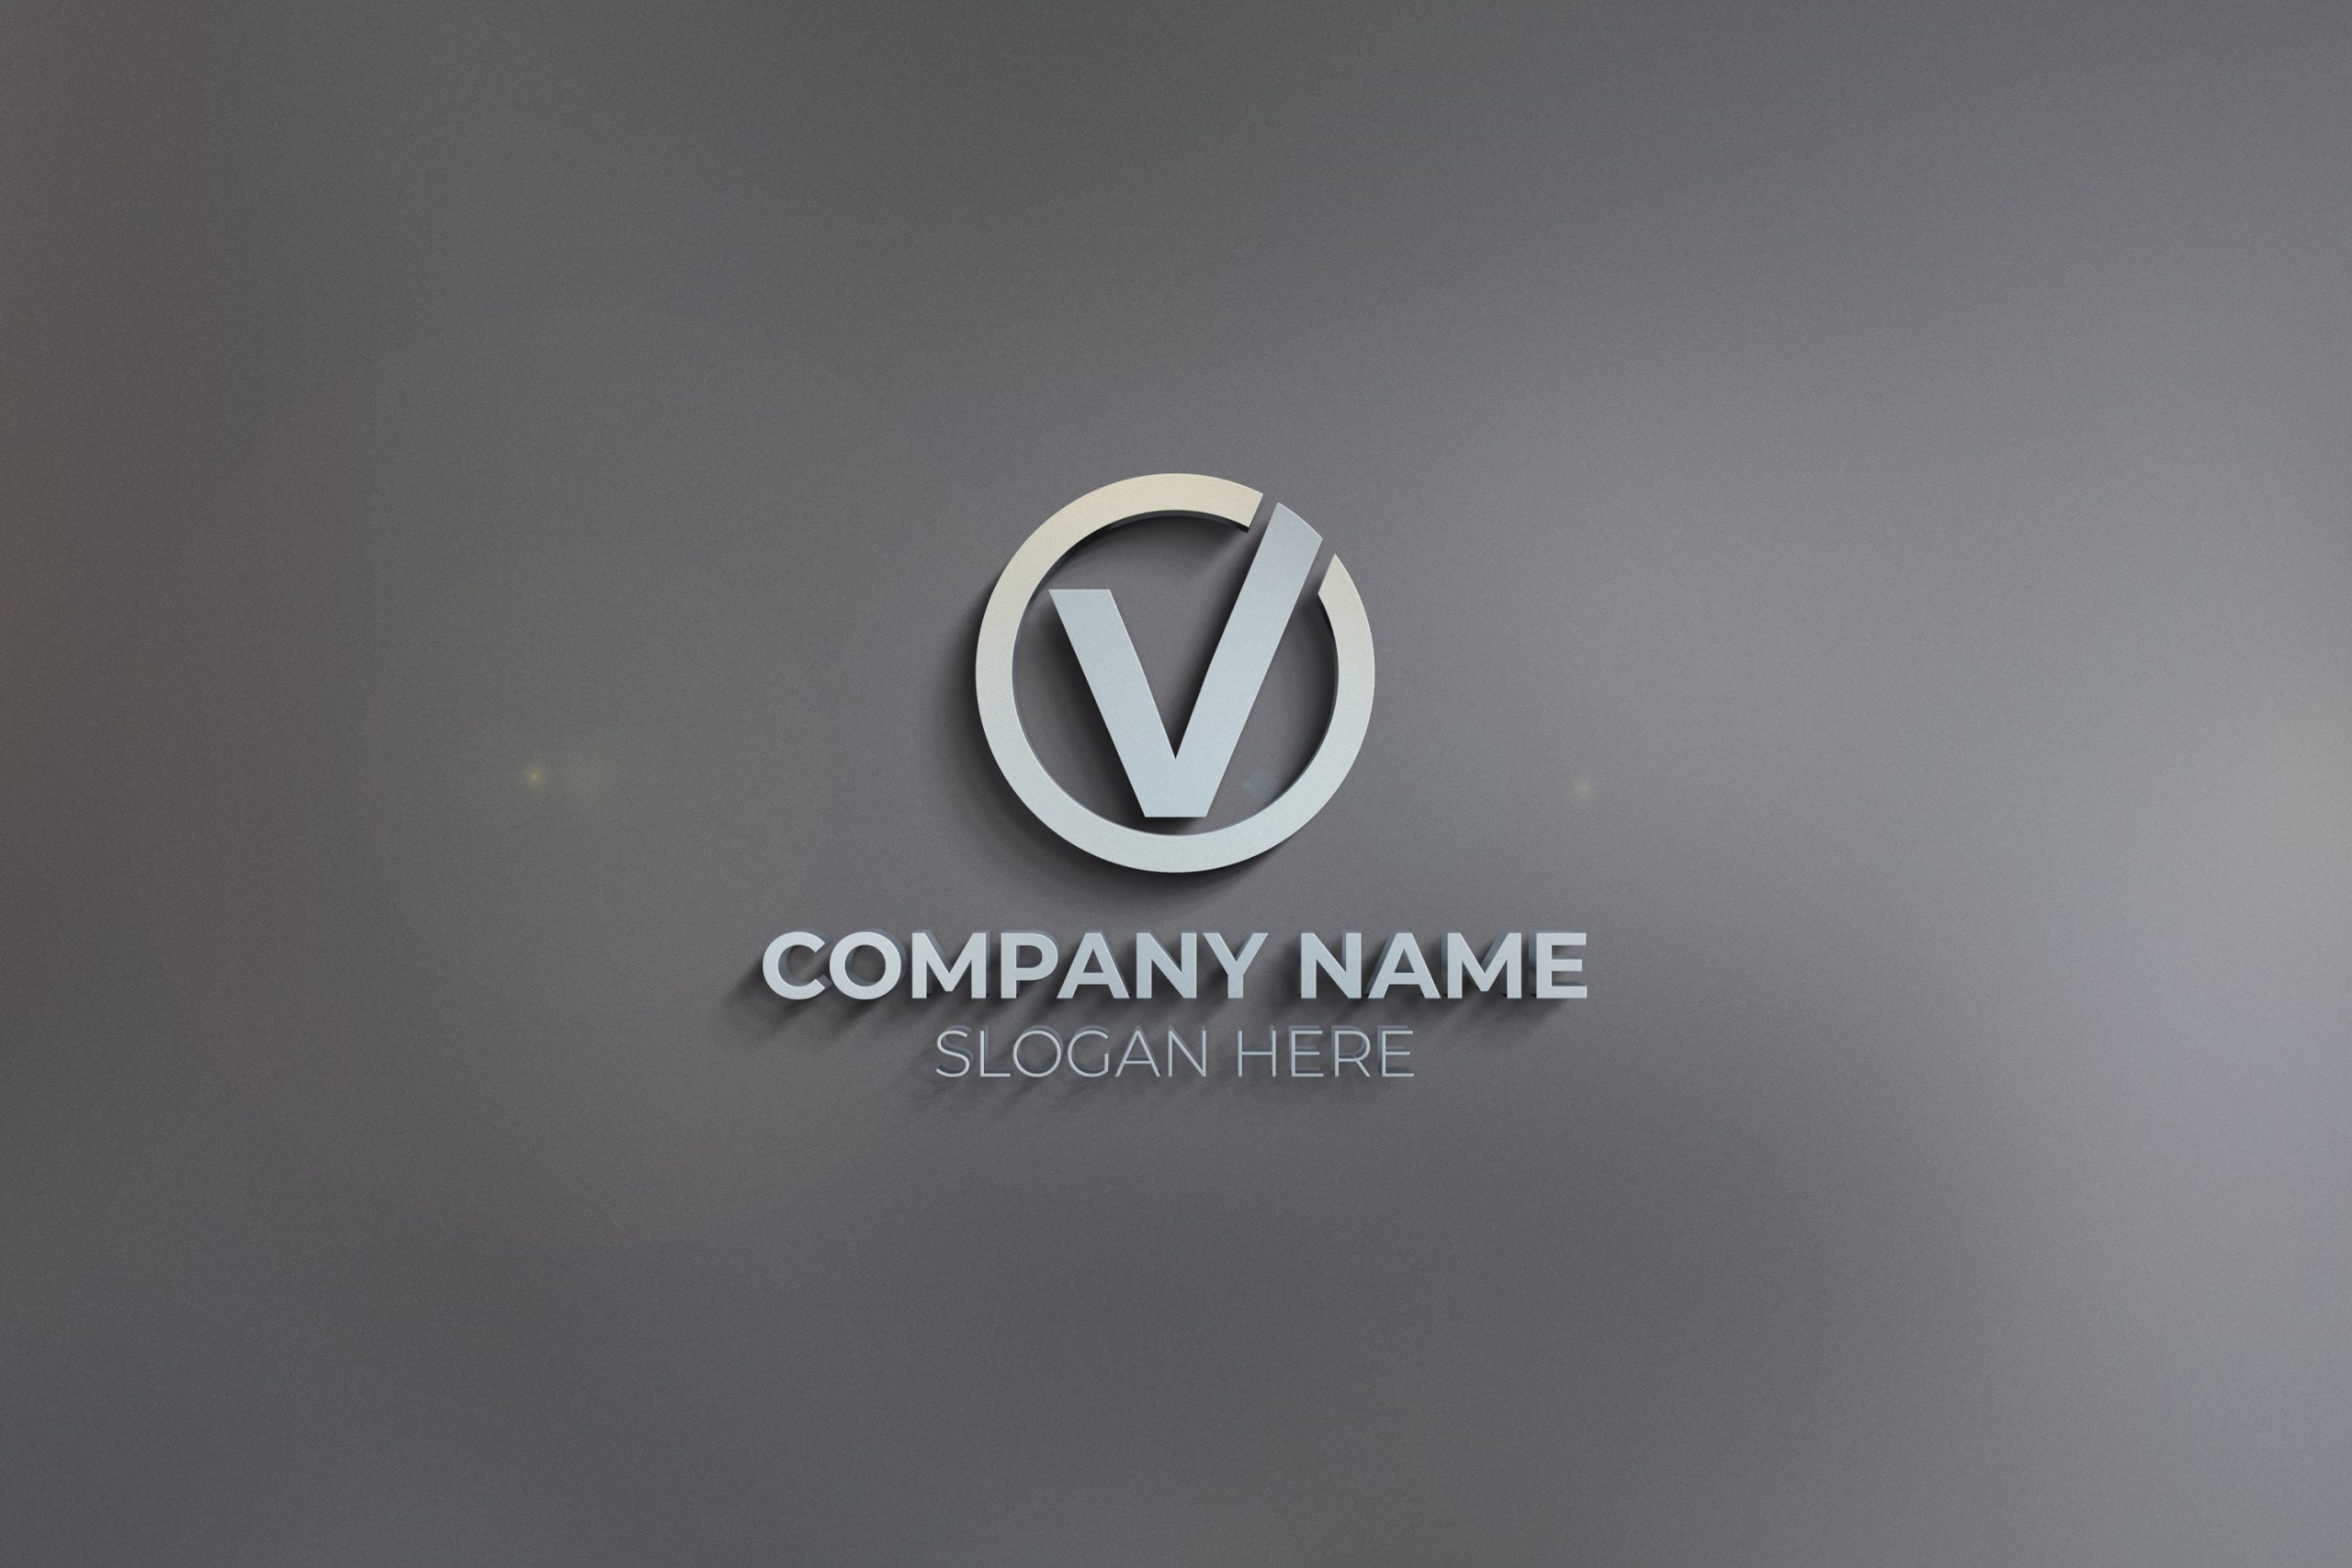 Letter VL Logotype Design for Company Name Colored Green Swoosh and Grey.  Vector Set Logo Design for Business and Company Identity Stock Vector -  Illustration of banking, market: 204277759